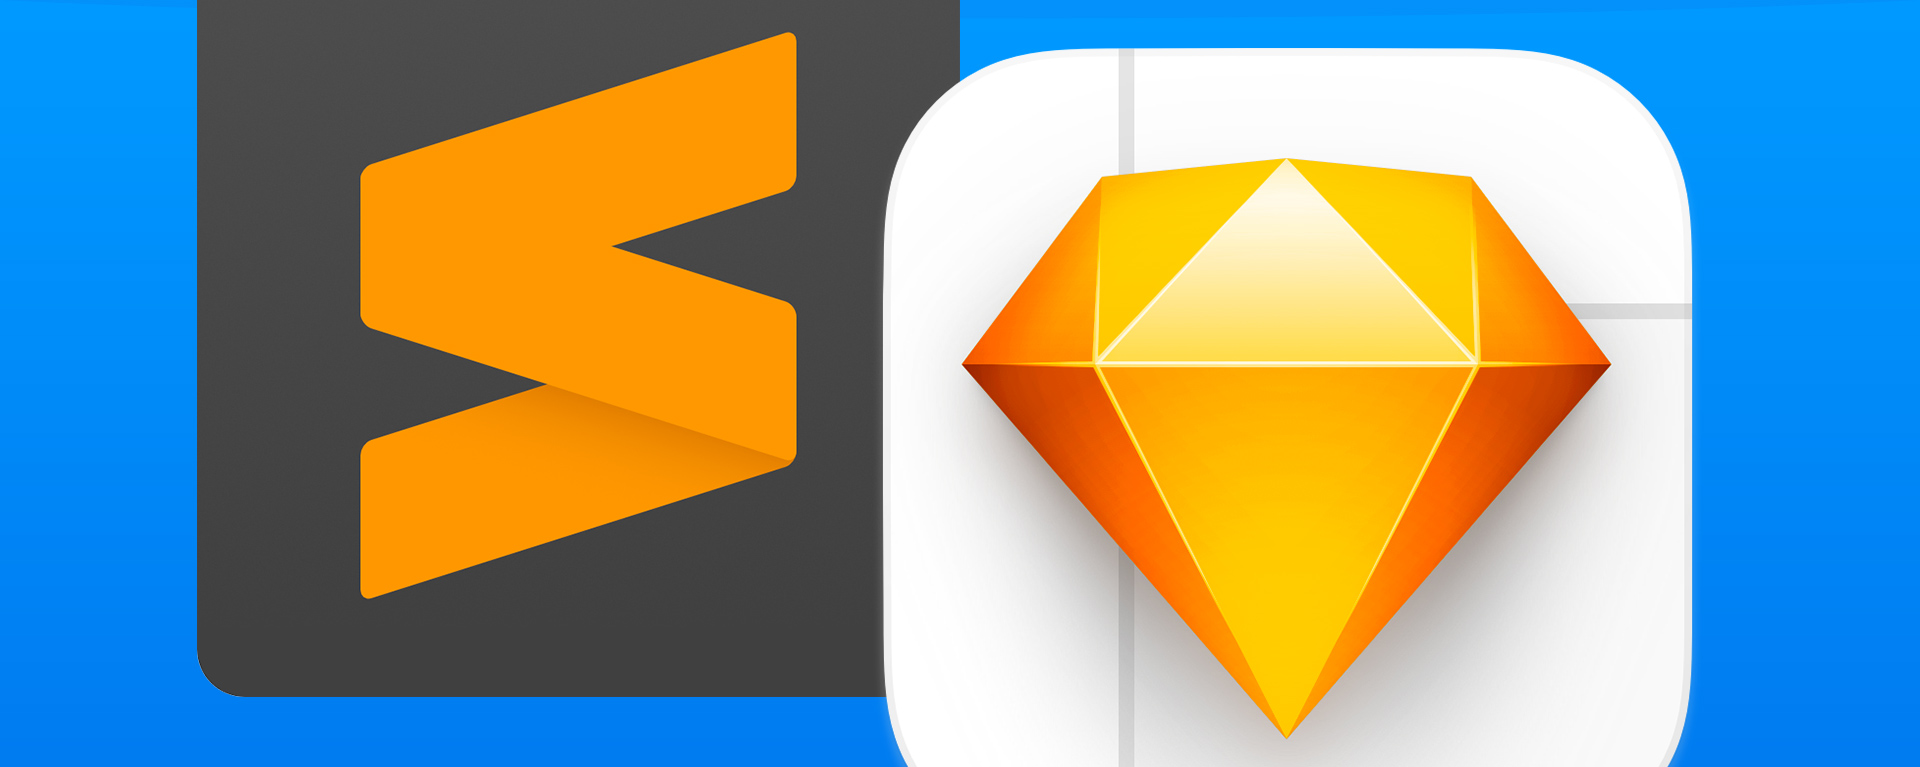 Sublime Text & Sketch App icons